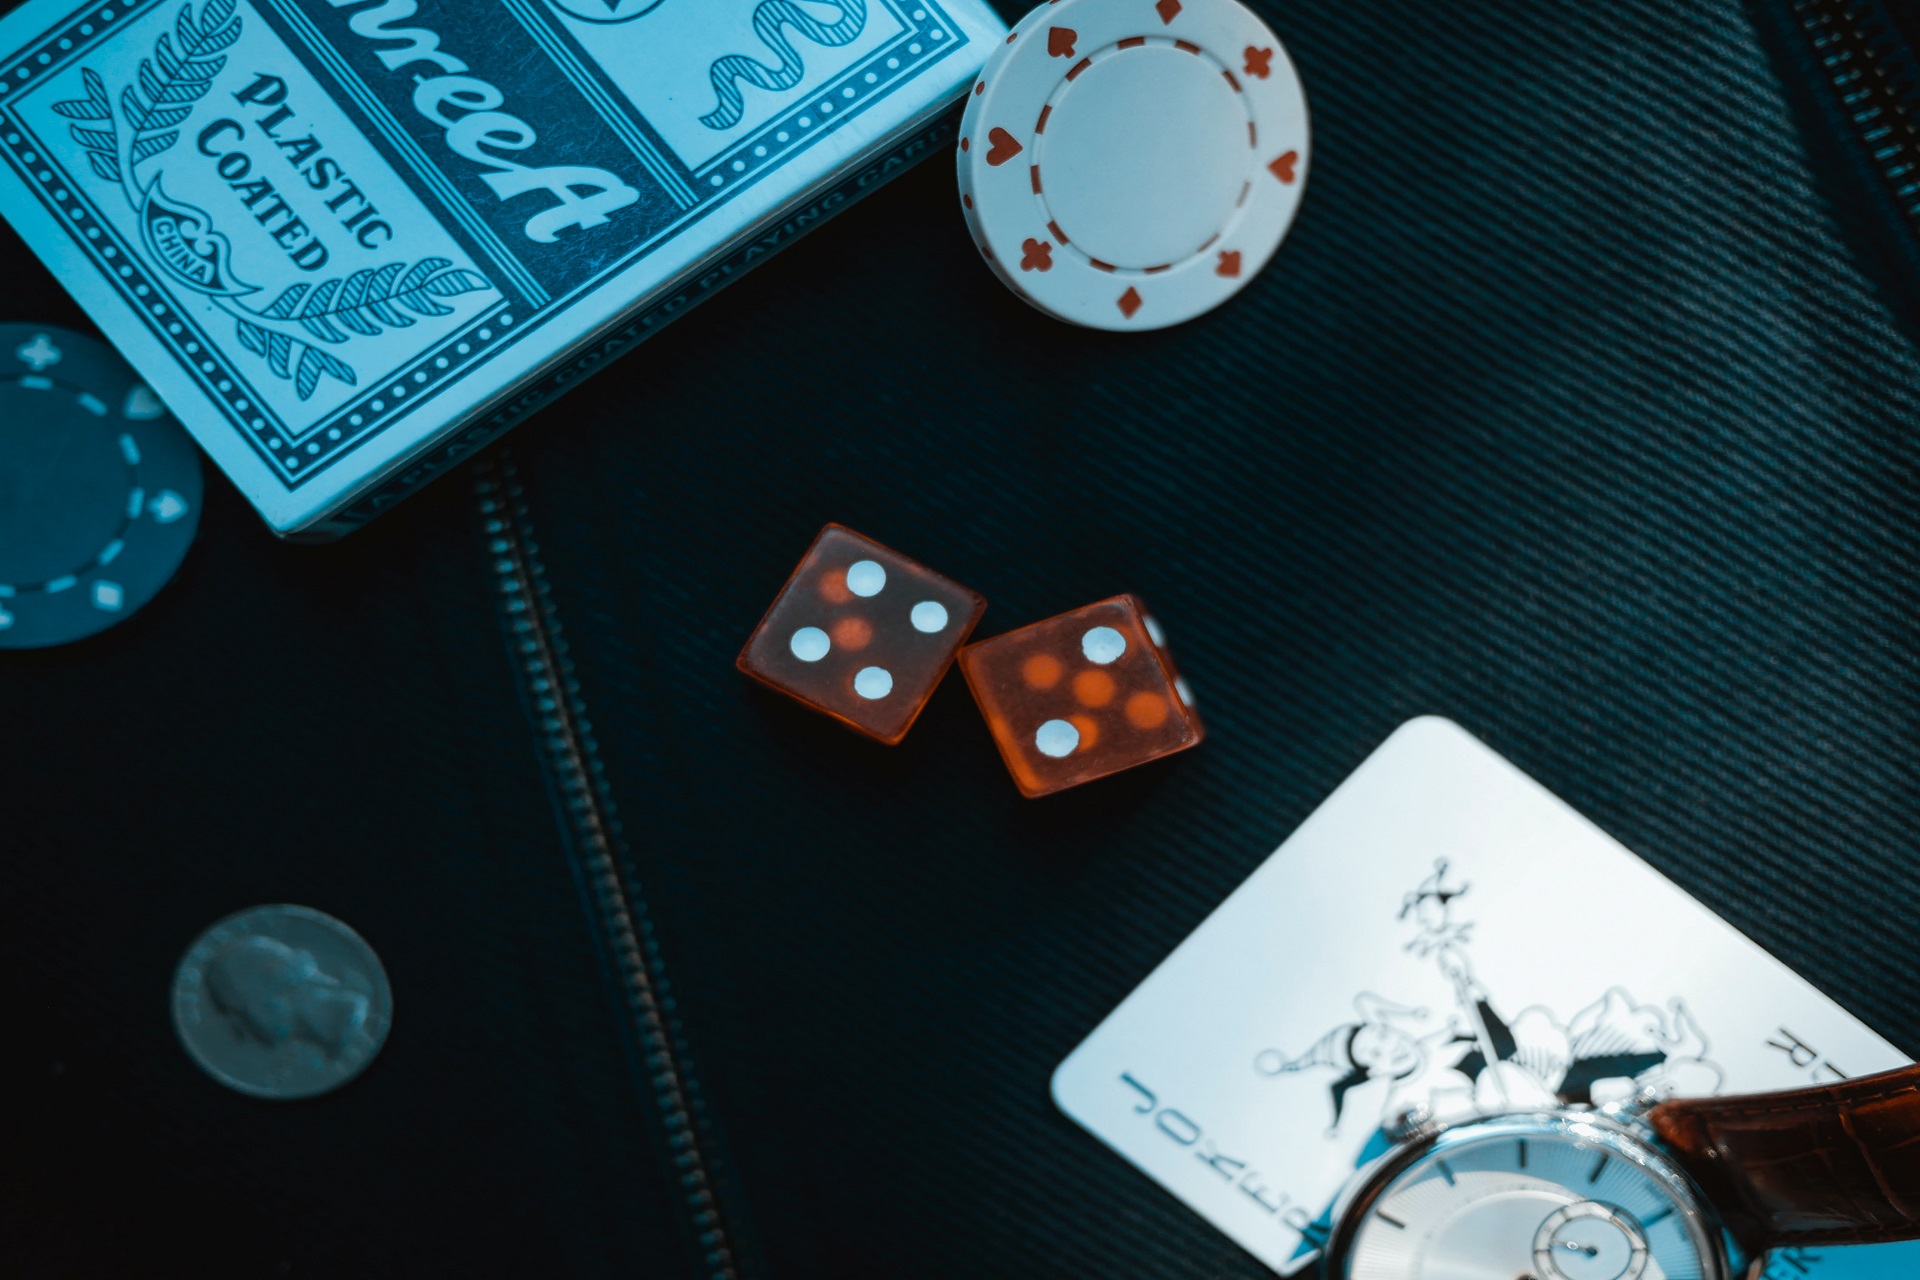 For Online Casinos, A Dark UX Interface Is Essential